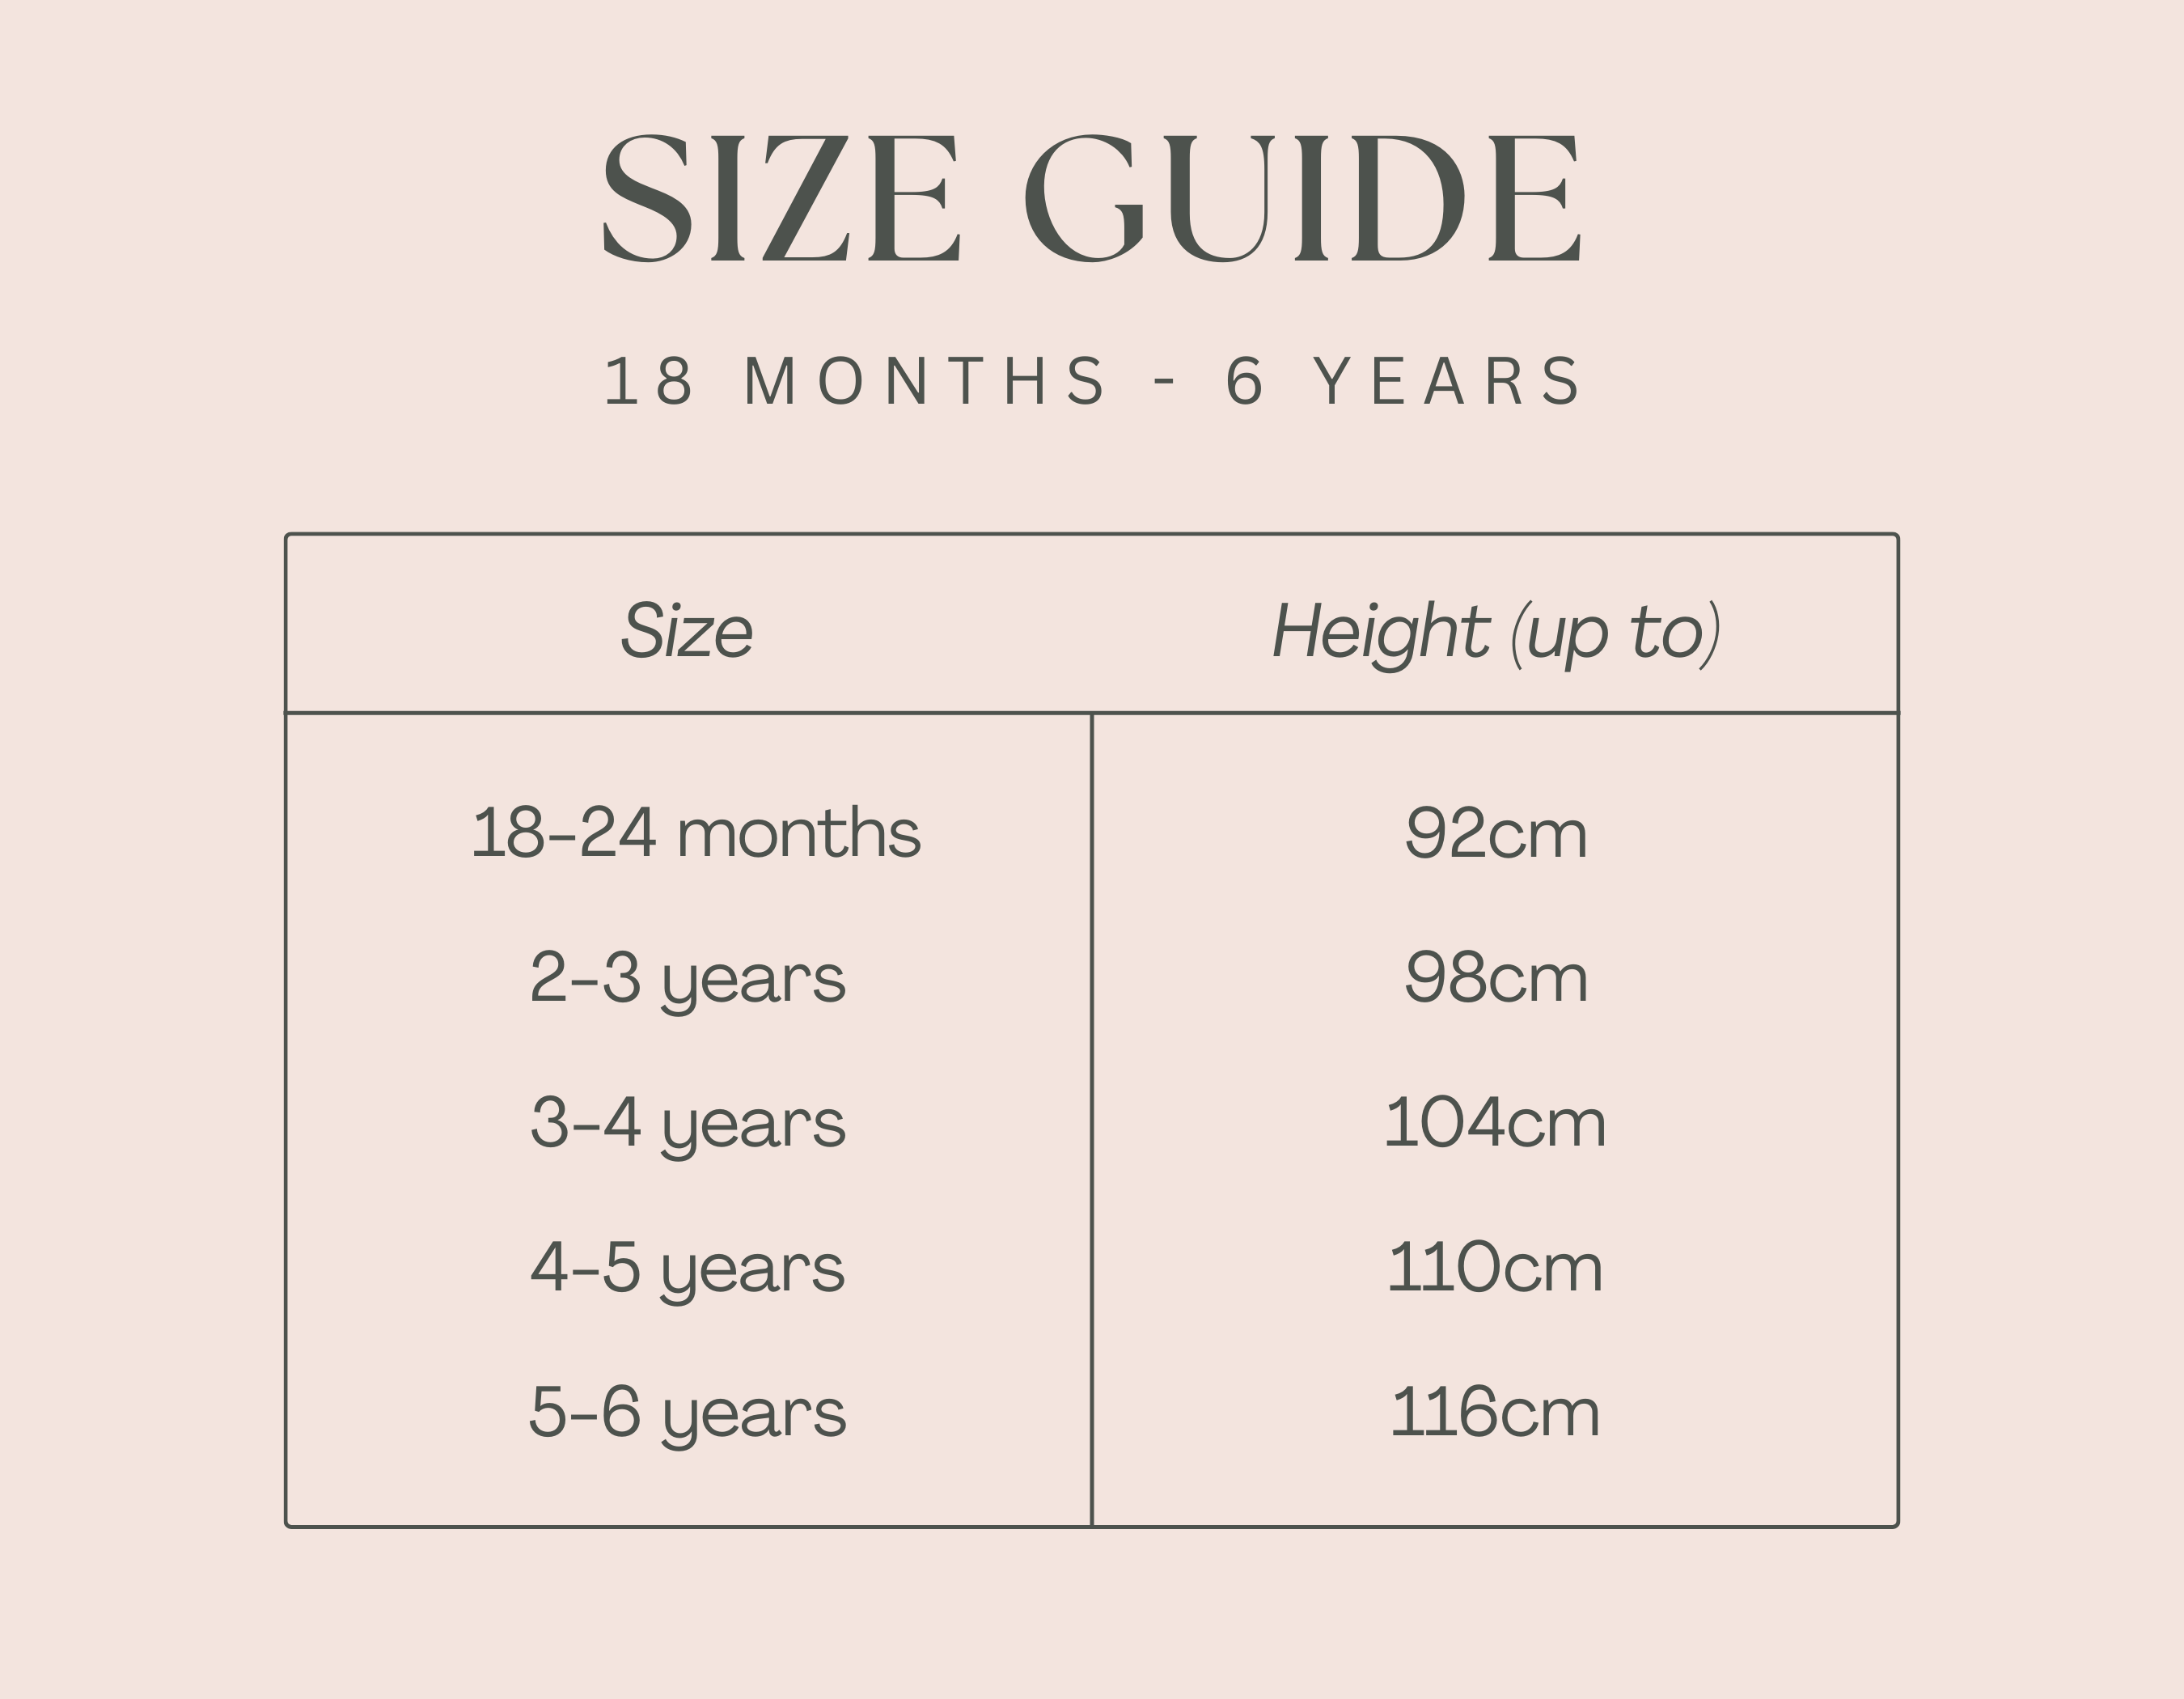 Aneby size guide 18 months to 6 years